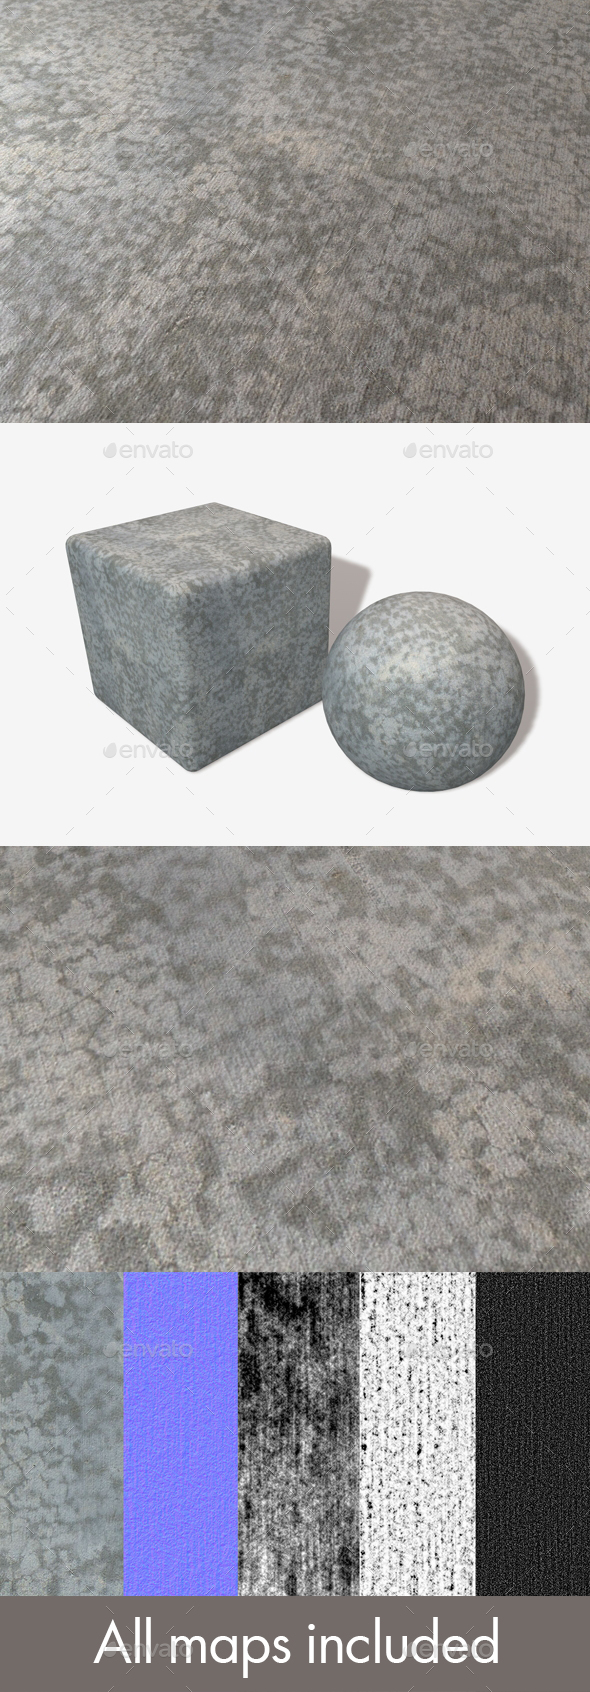 Drying Concrete Seamless - 3Docean 19671427